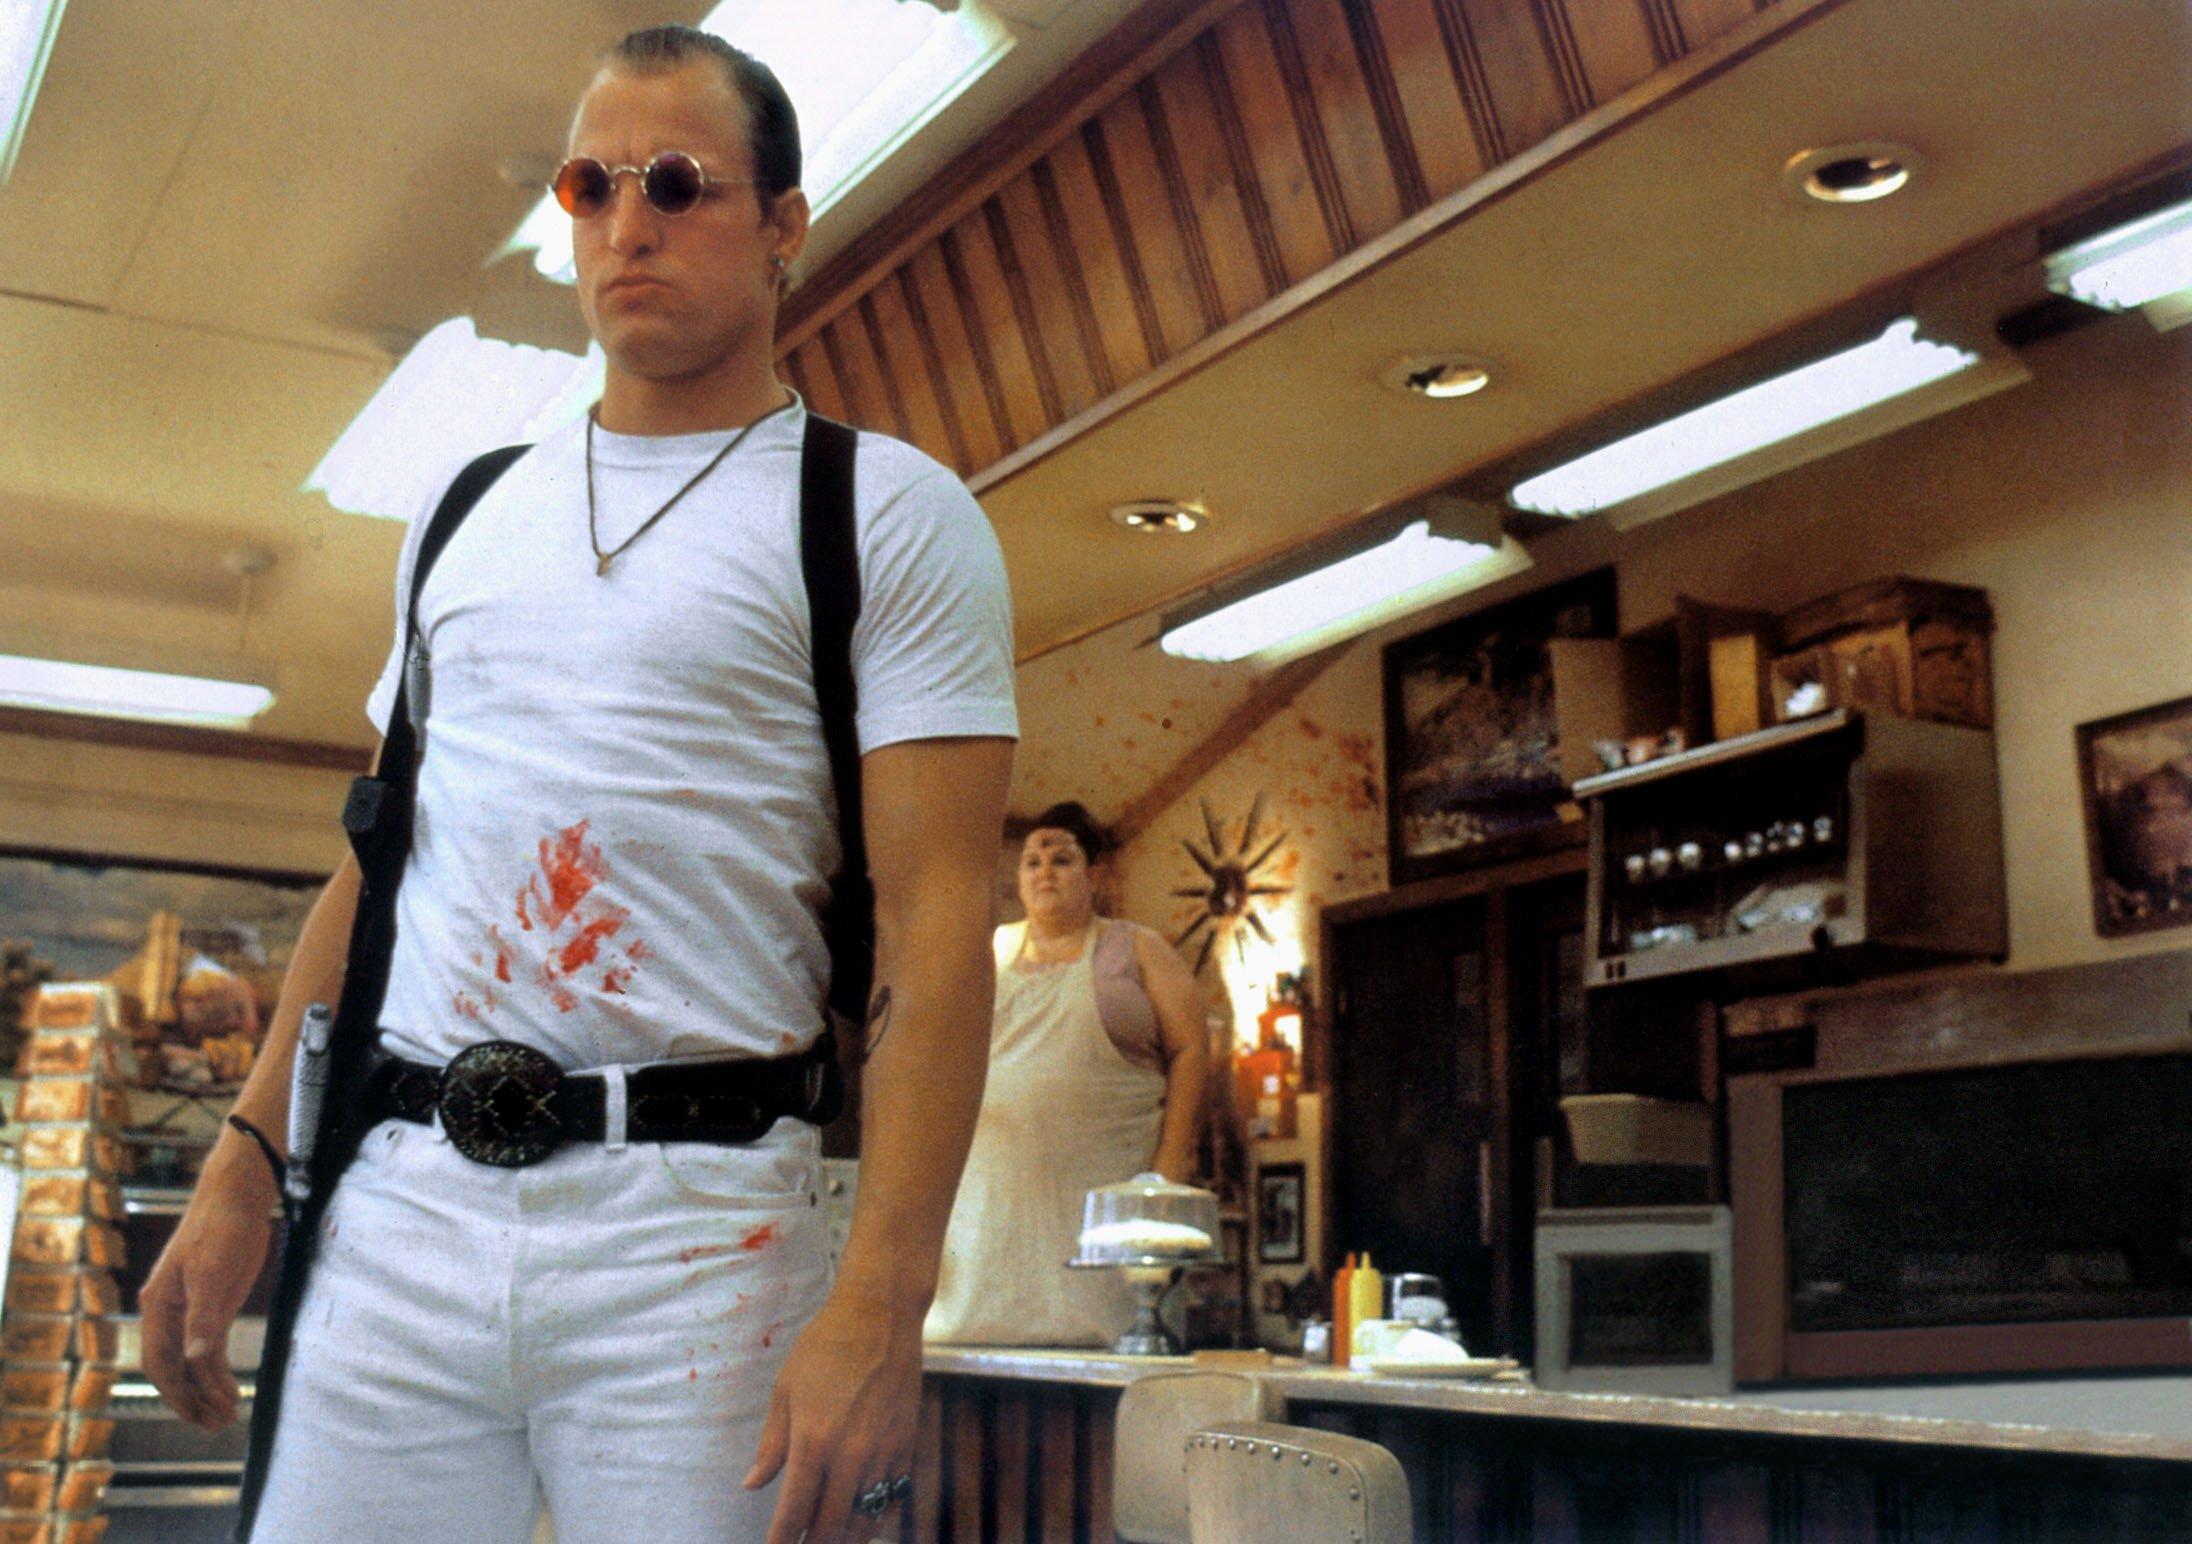 Woody played a murderer in Natural Born Killers, but his dad was the real deal